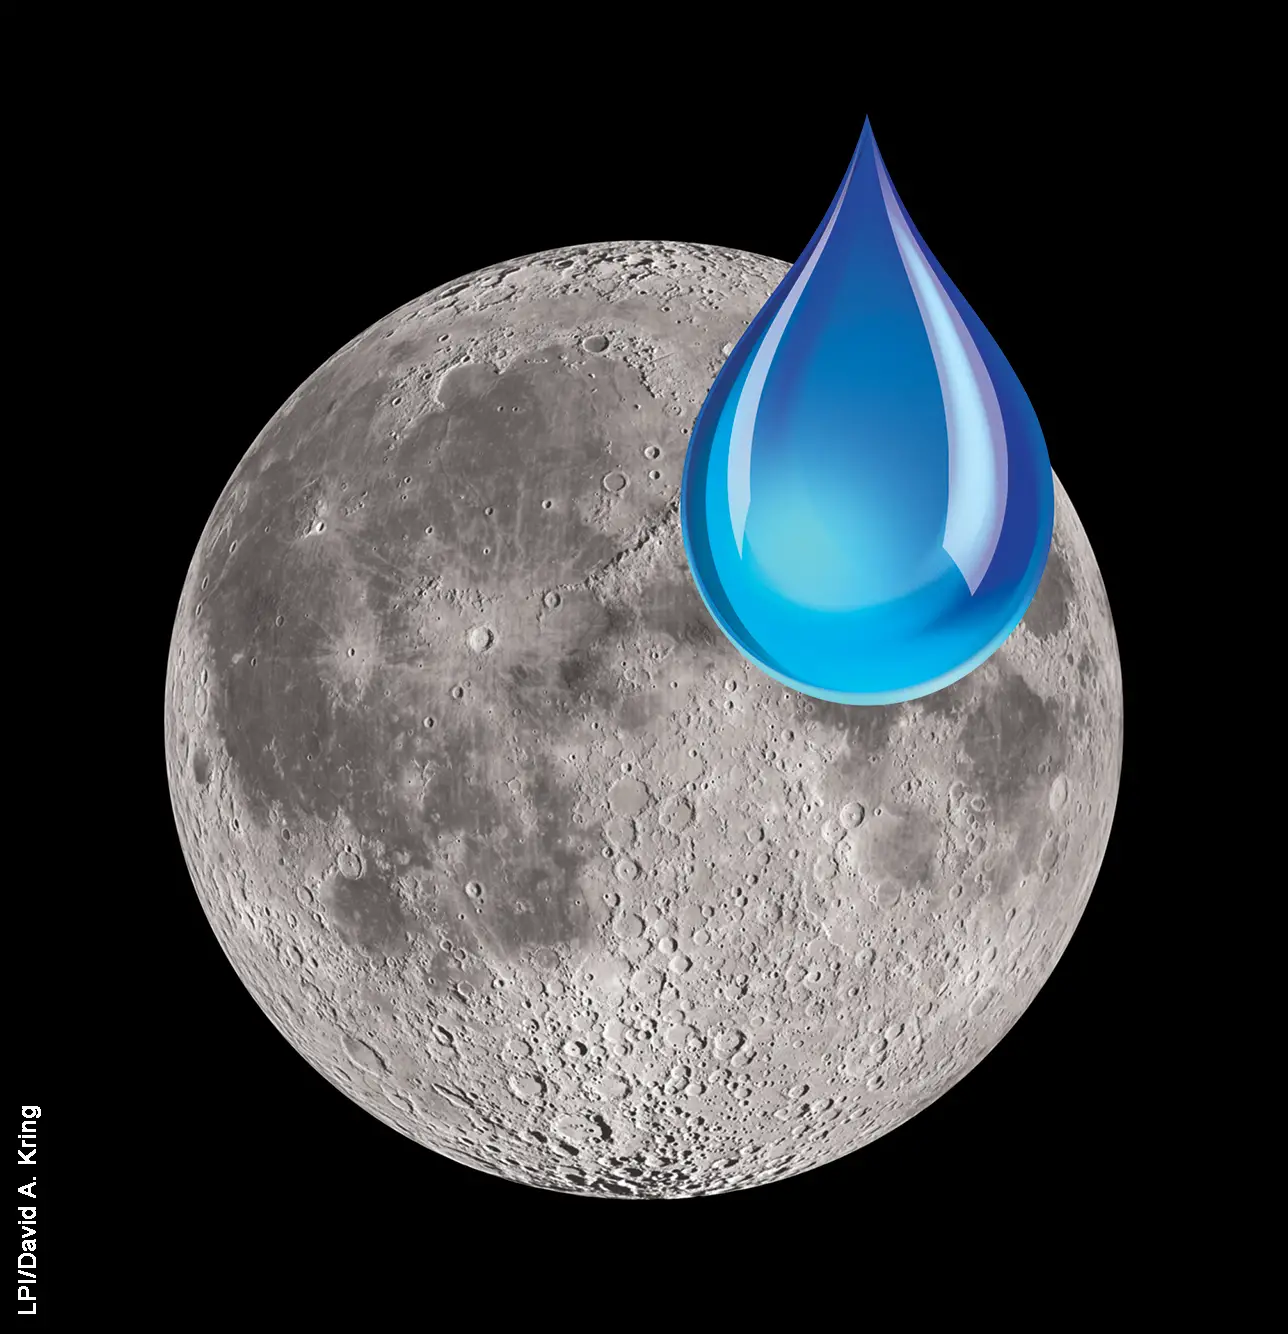 Scientists Identify Source of the Moonâs Water